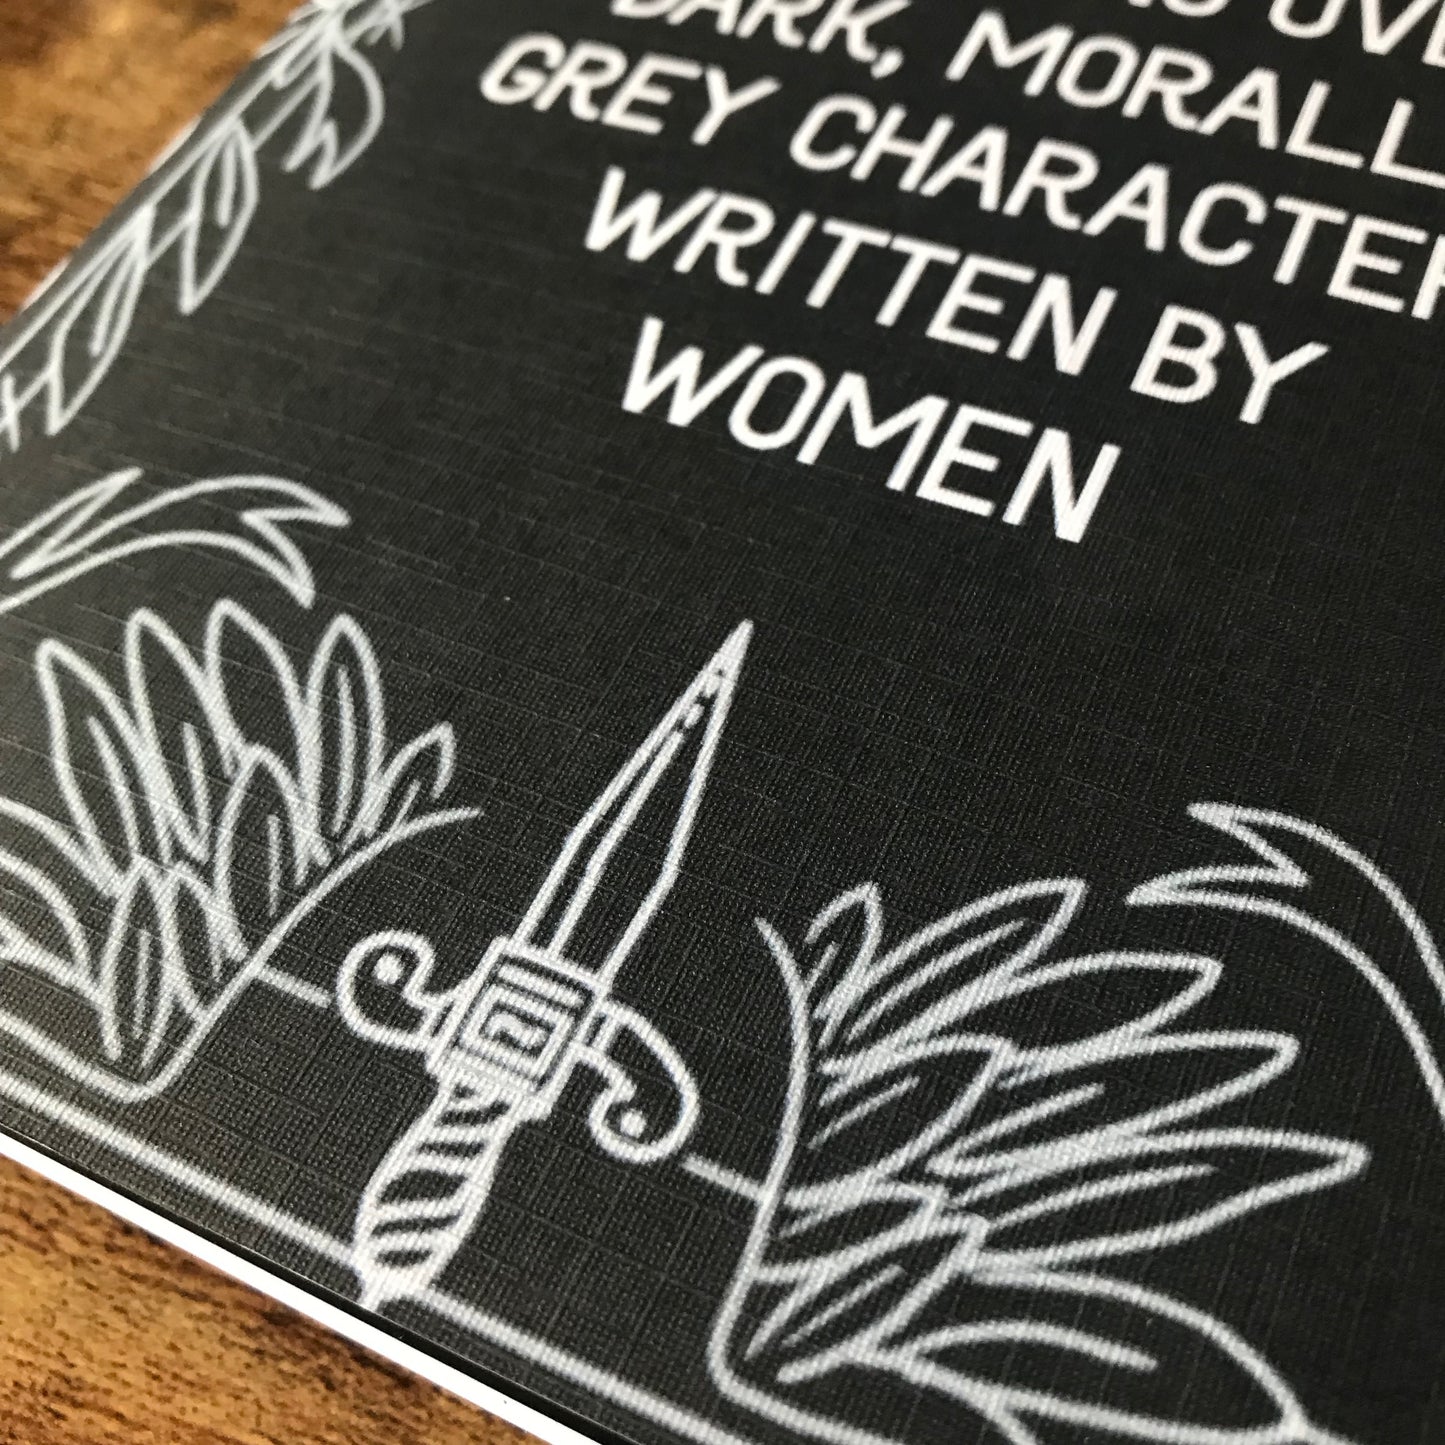 Dark, Morally Grey Characters, A5 Softcover Notebook